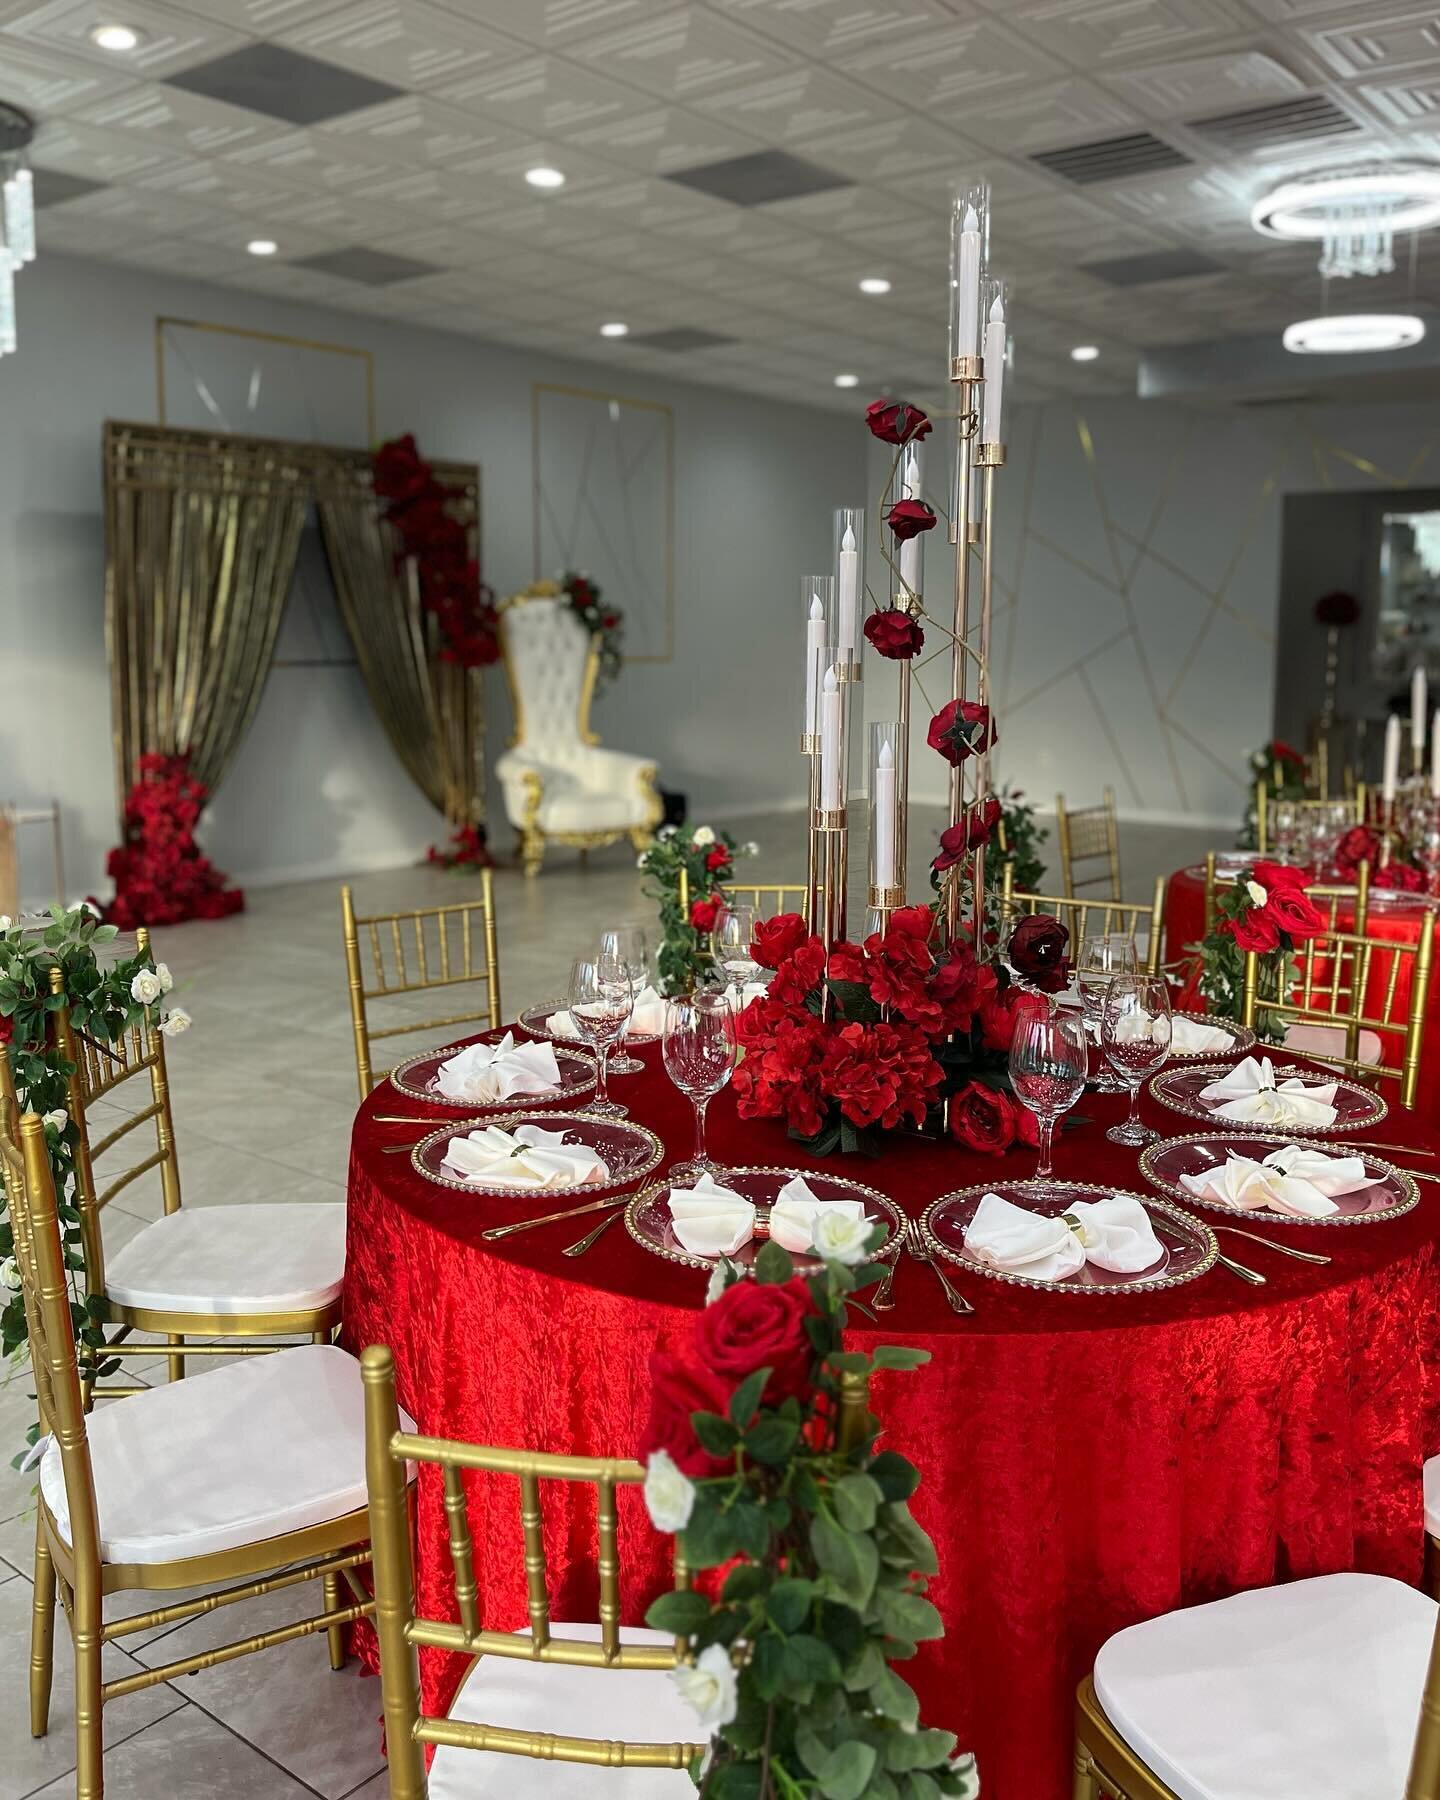 No filter needed 💋 
We hope this Valentine was extra special. 

Velvet event space sets the stage for a romantic and enchanting celebration. Book now for an unforgettable evening filled with love, elegance, and cherished memories.

📍6518 Brittmoore